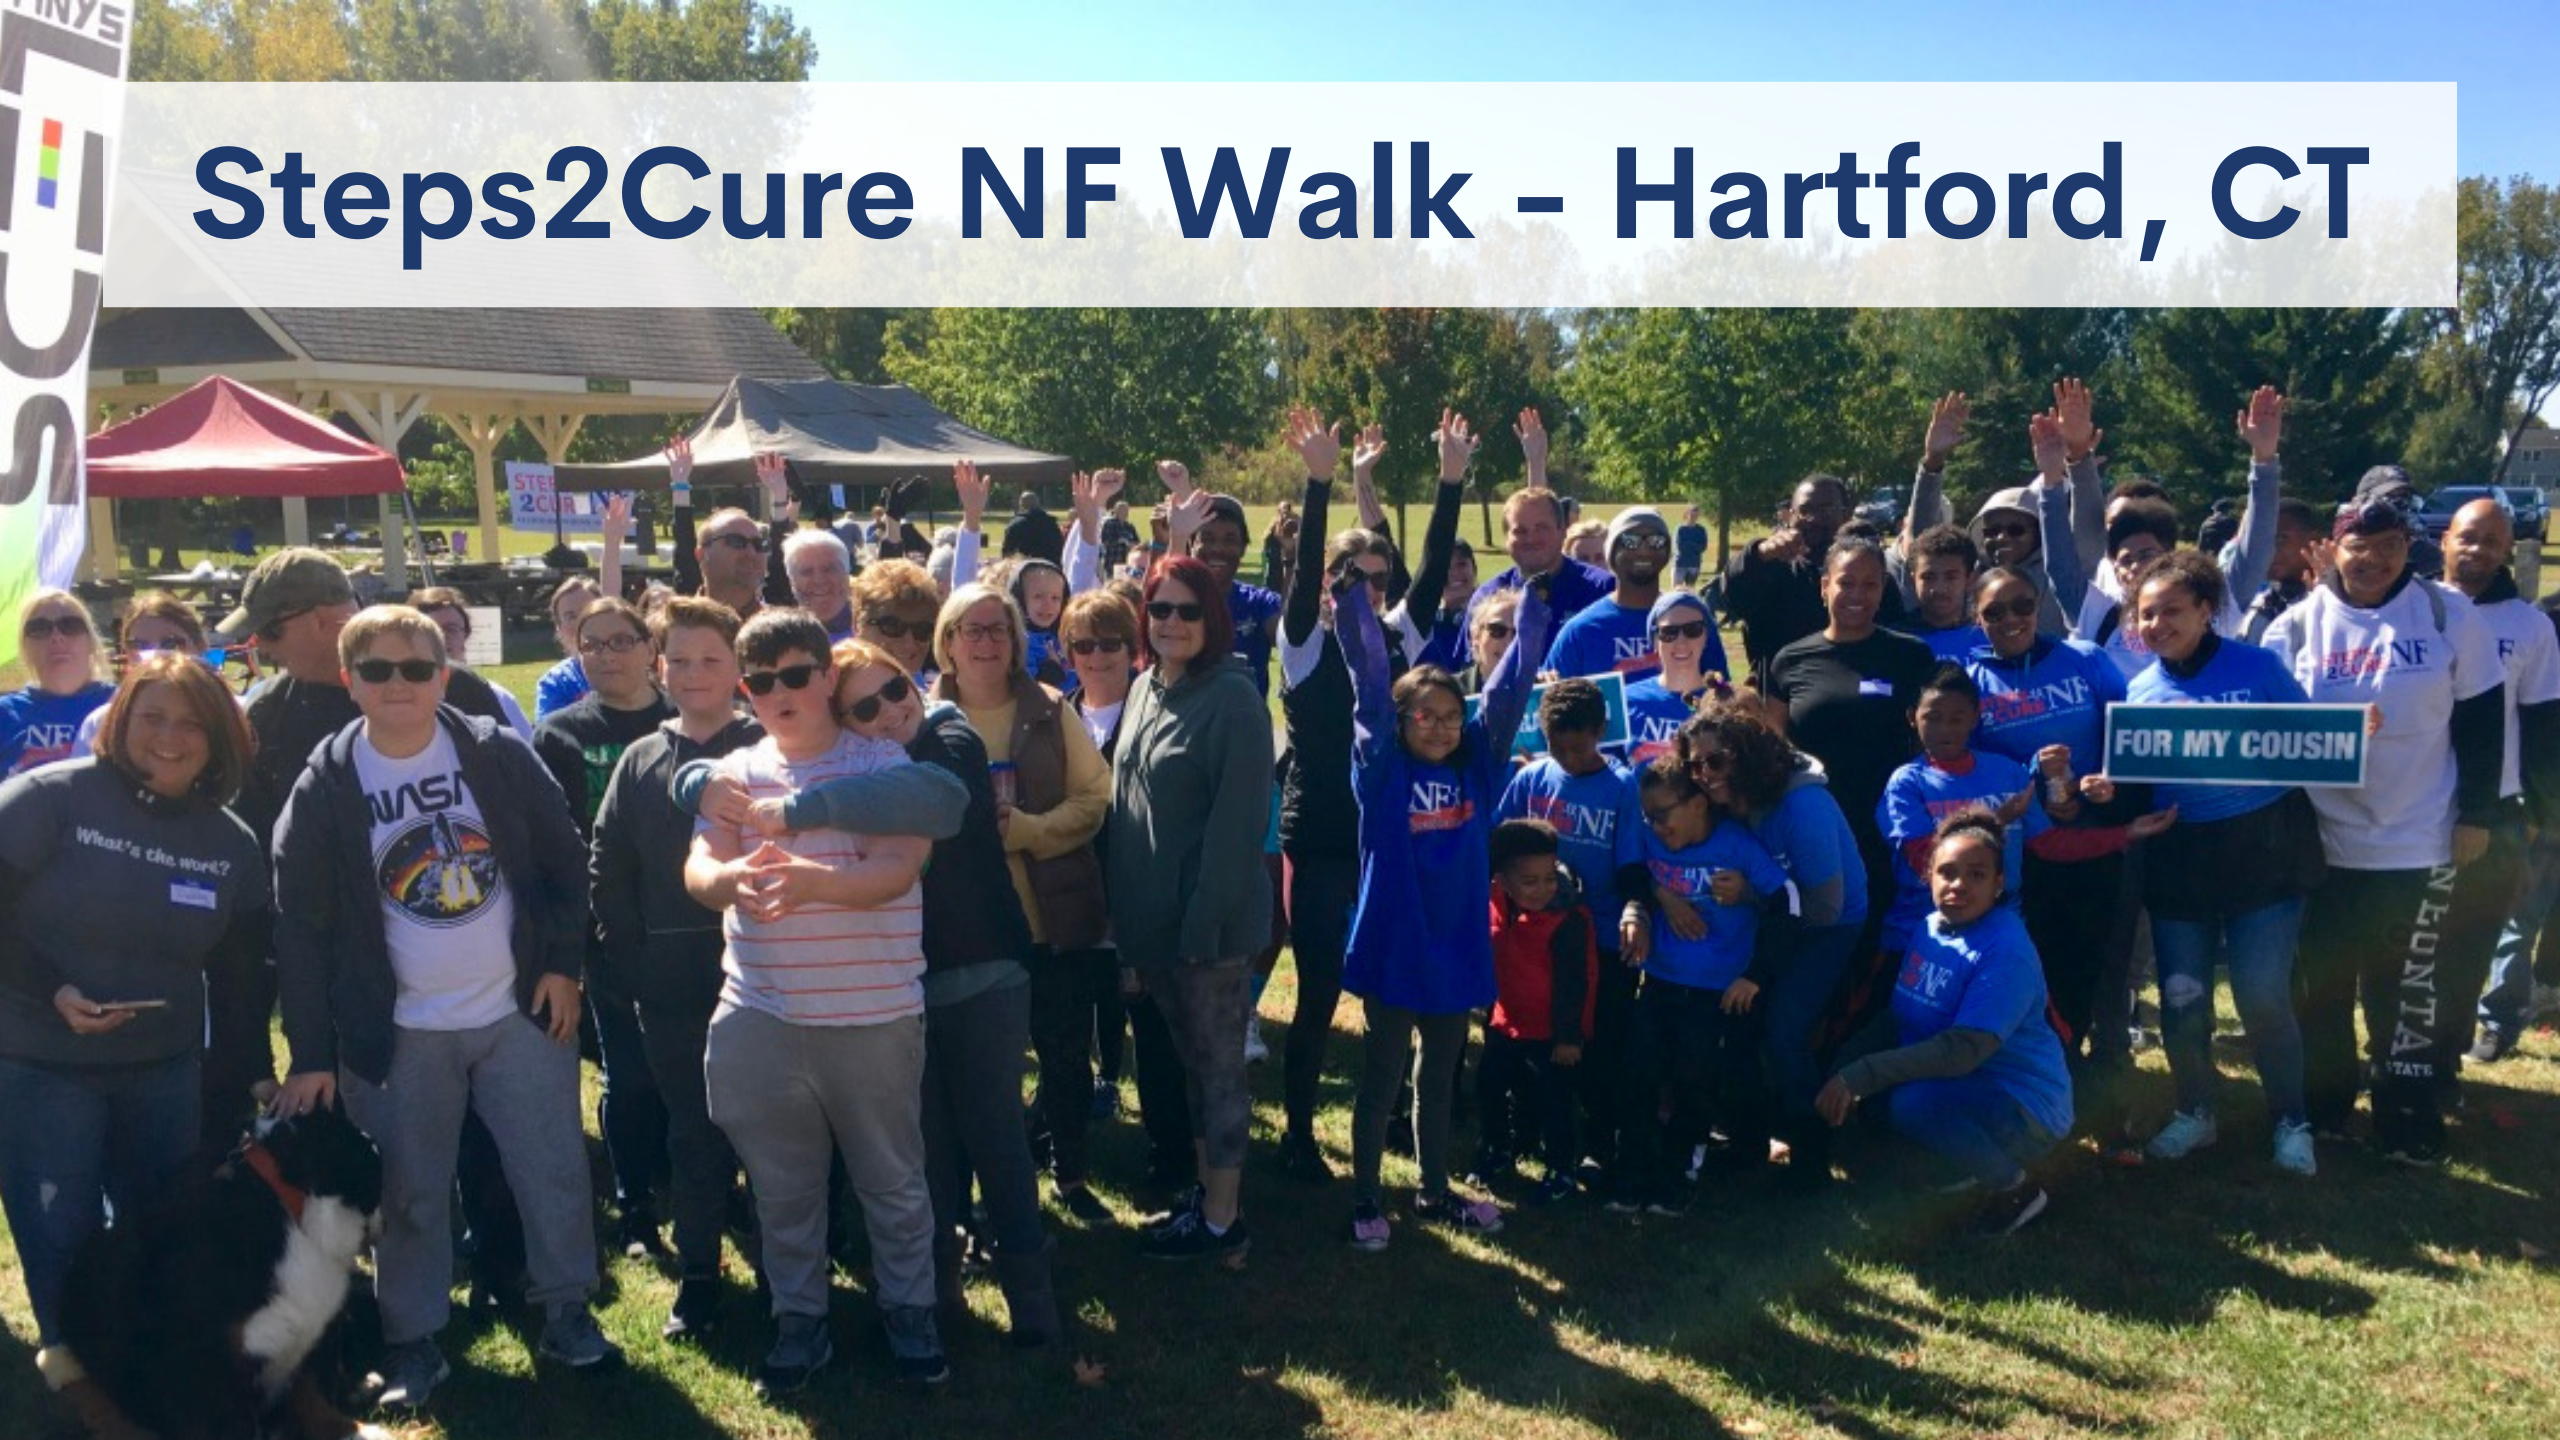 Photo of Steps2Cure Walk participants in Hartford, CT